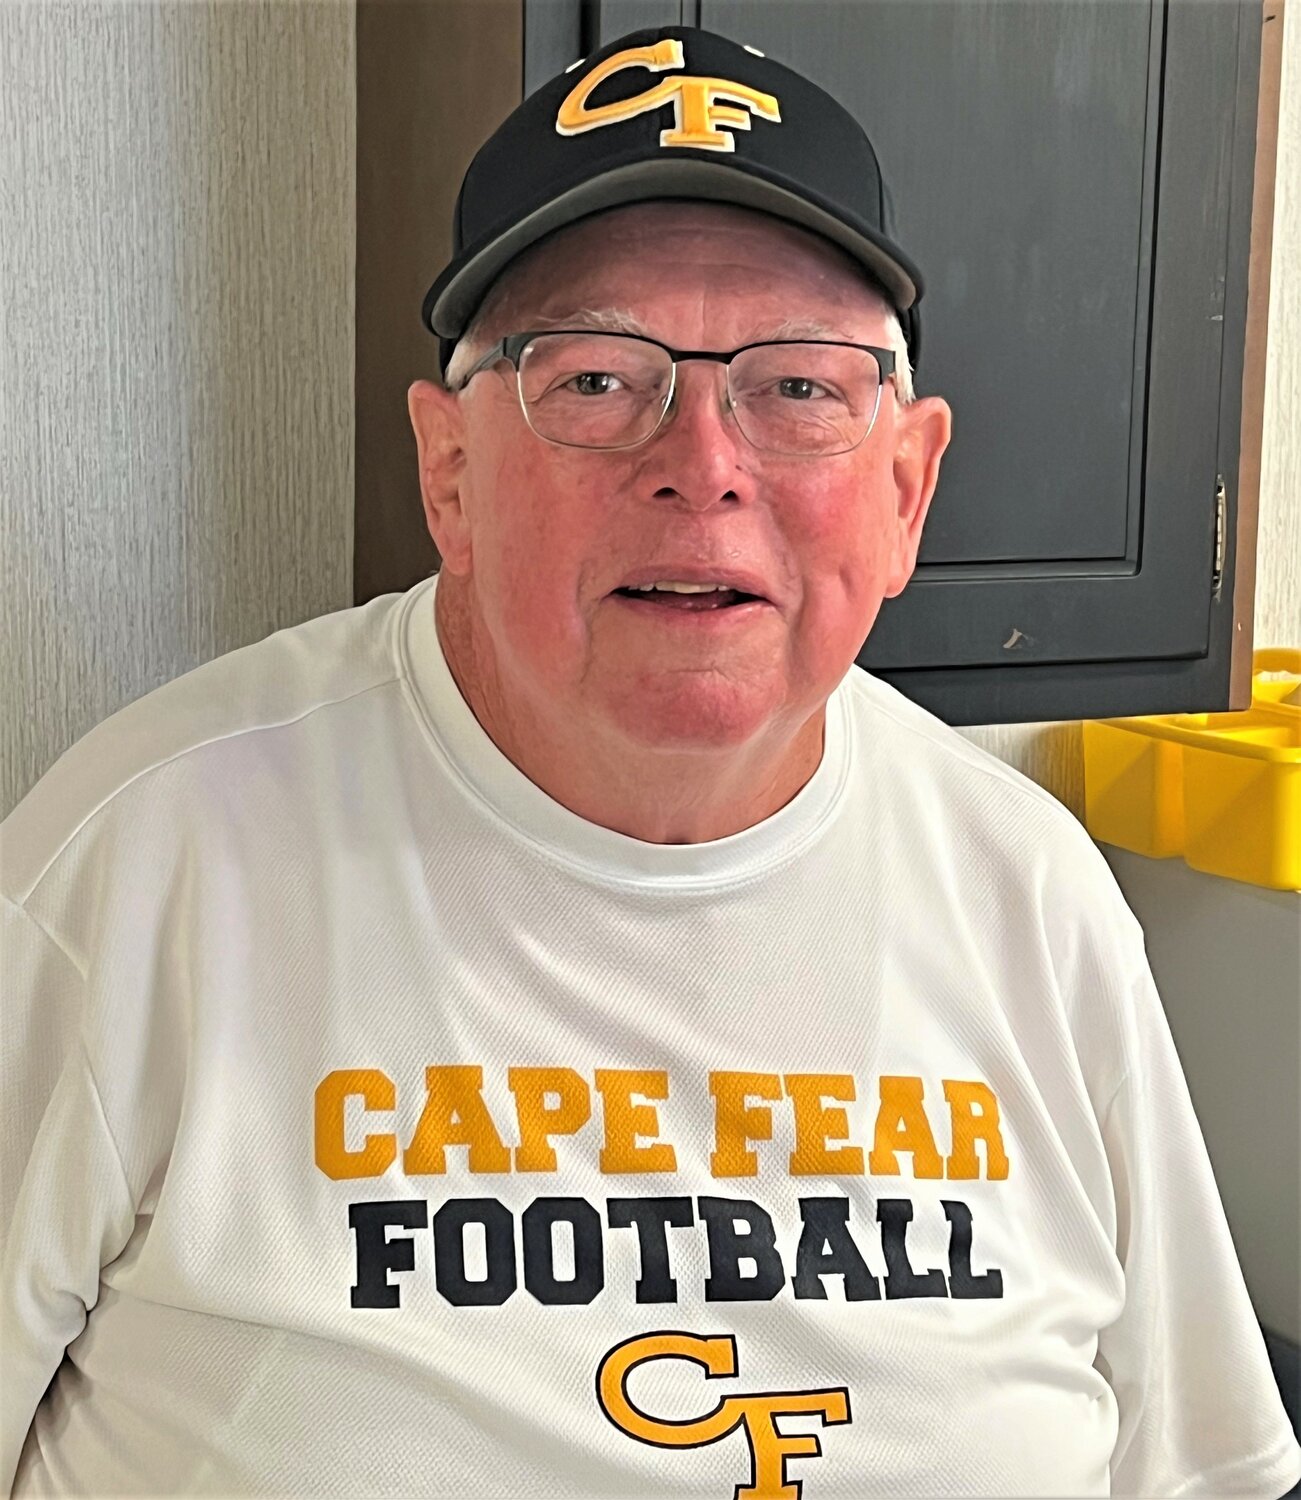 Doug Caudill has worked for more than a dozen senior, middle and junior high schools, making multiple stops at some to include Seventy-First, Hope Mills Junior High, South View, Gray’s Creek and, currently, Cape Fear.